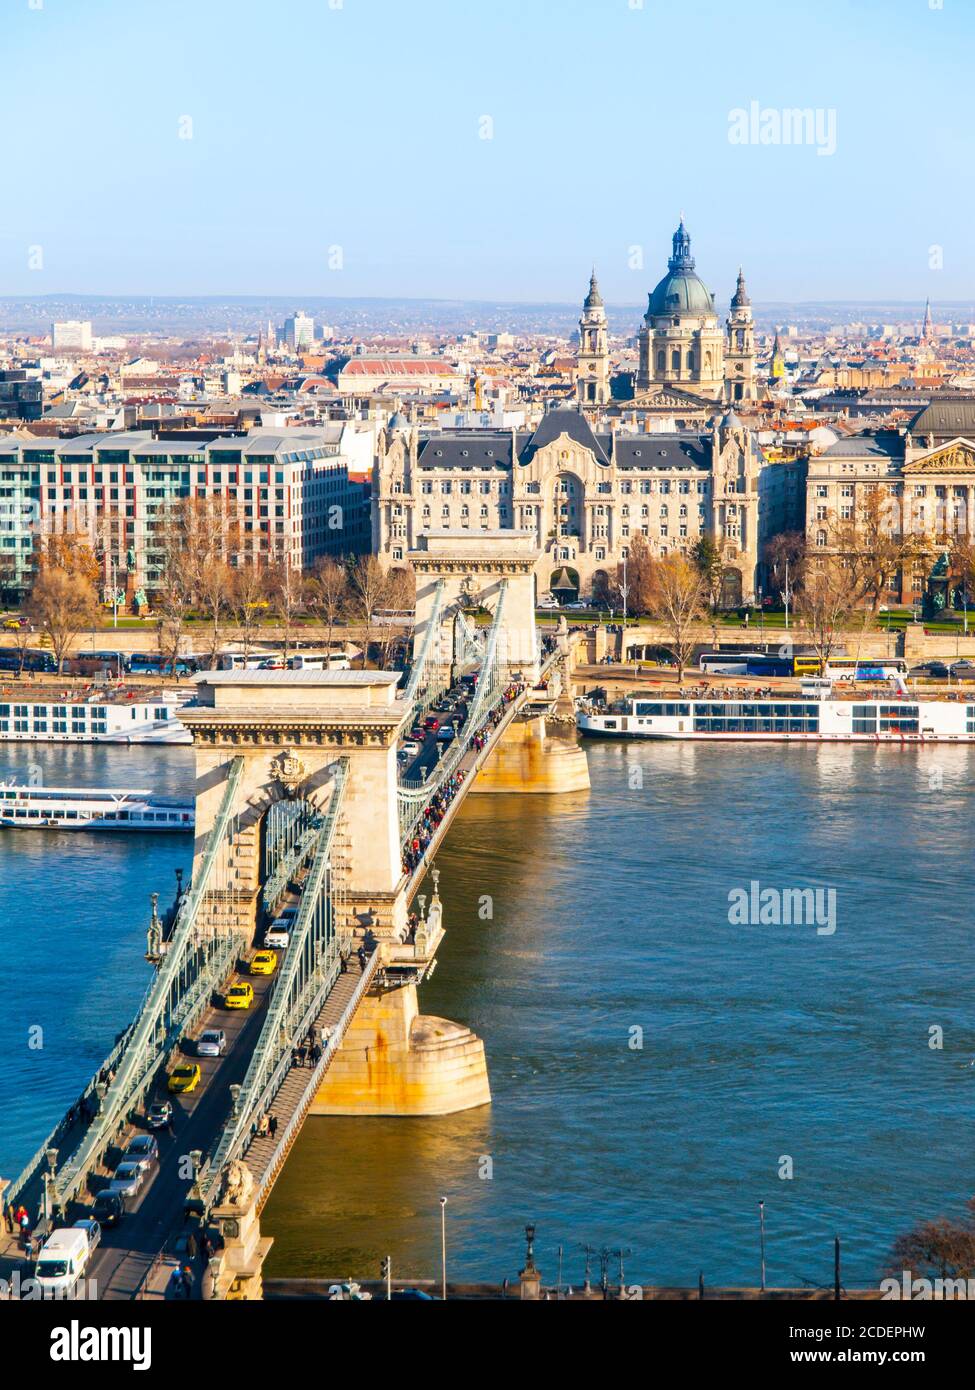 Famous Chain Bridge over Danube River, Gresham Palace and Saint Stephen's Basilica view from Buda Castle on sunny autumn day in Budapest, capital city of Hungary, Europe. UNESCO World Heritage Site Stock Photo